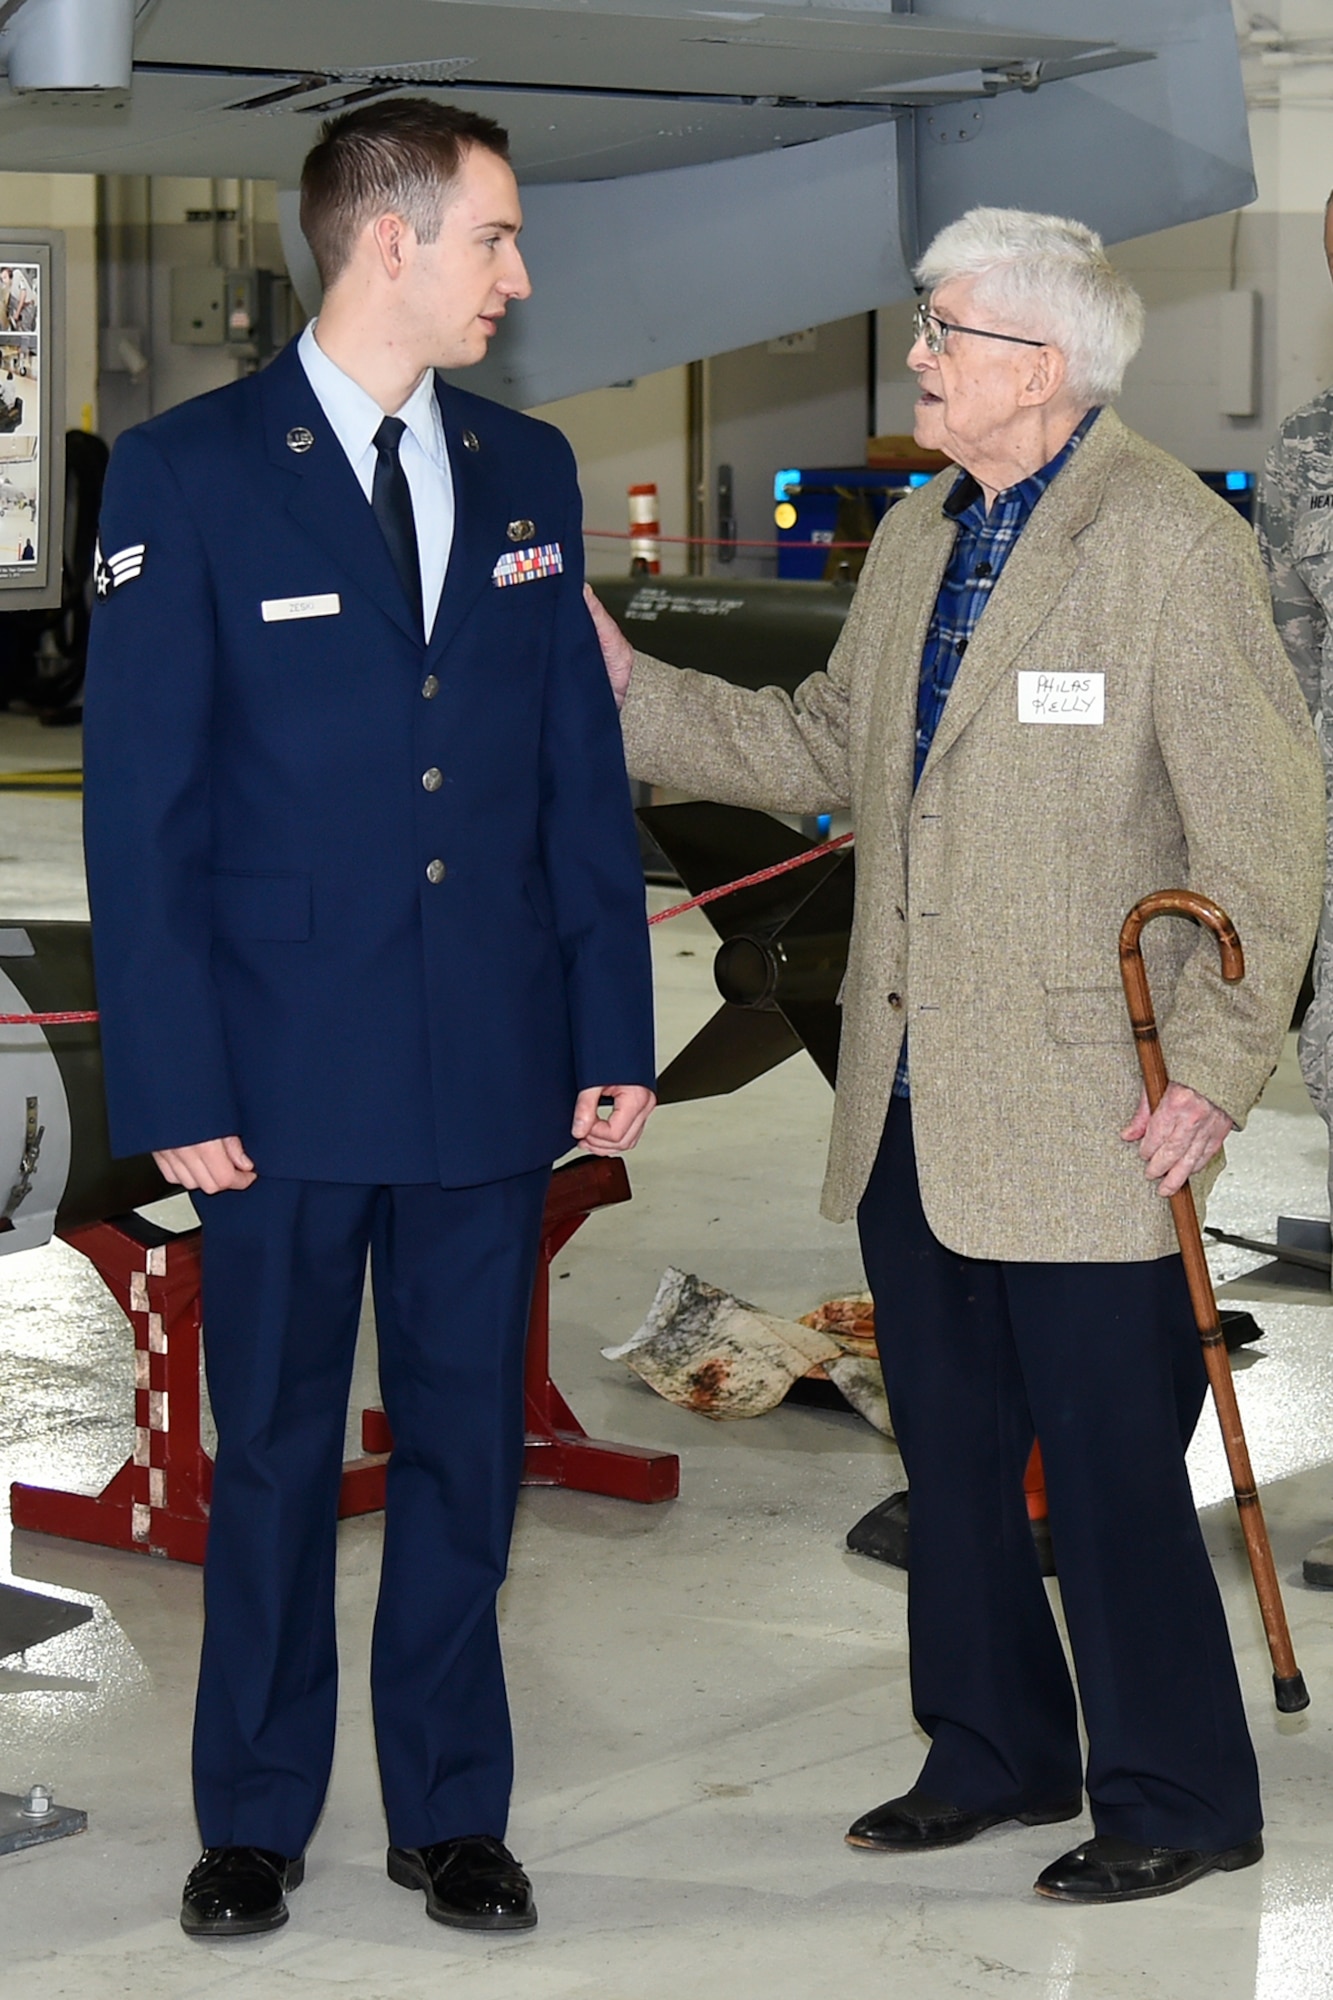 Philas Kelly, at age 102 likely the oldest living former photographer to have served in the National Guard, talks with Senior Airman Ryan Zeski, the youngest photojournalist currently serving in the Michigan Air National Guard’s 127th Wing at Selfridge Air National Guard Base. Kelly was recently a guest at the base to visit his old unit, now the 107th Fighter Squadron. (U.S. Air National Guard photo by Terry Atwell)